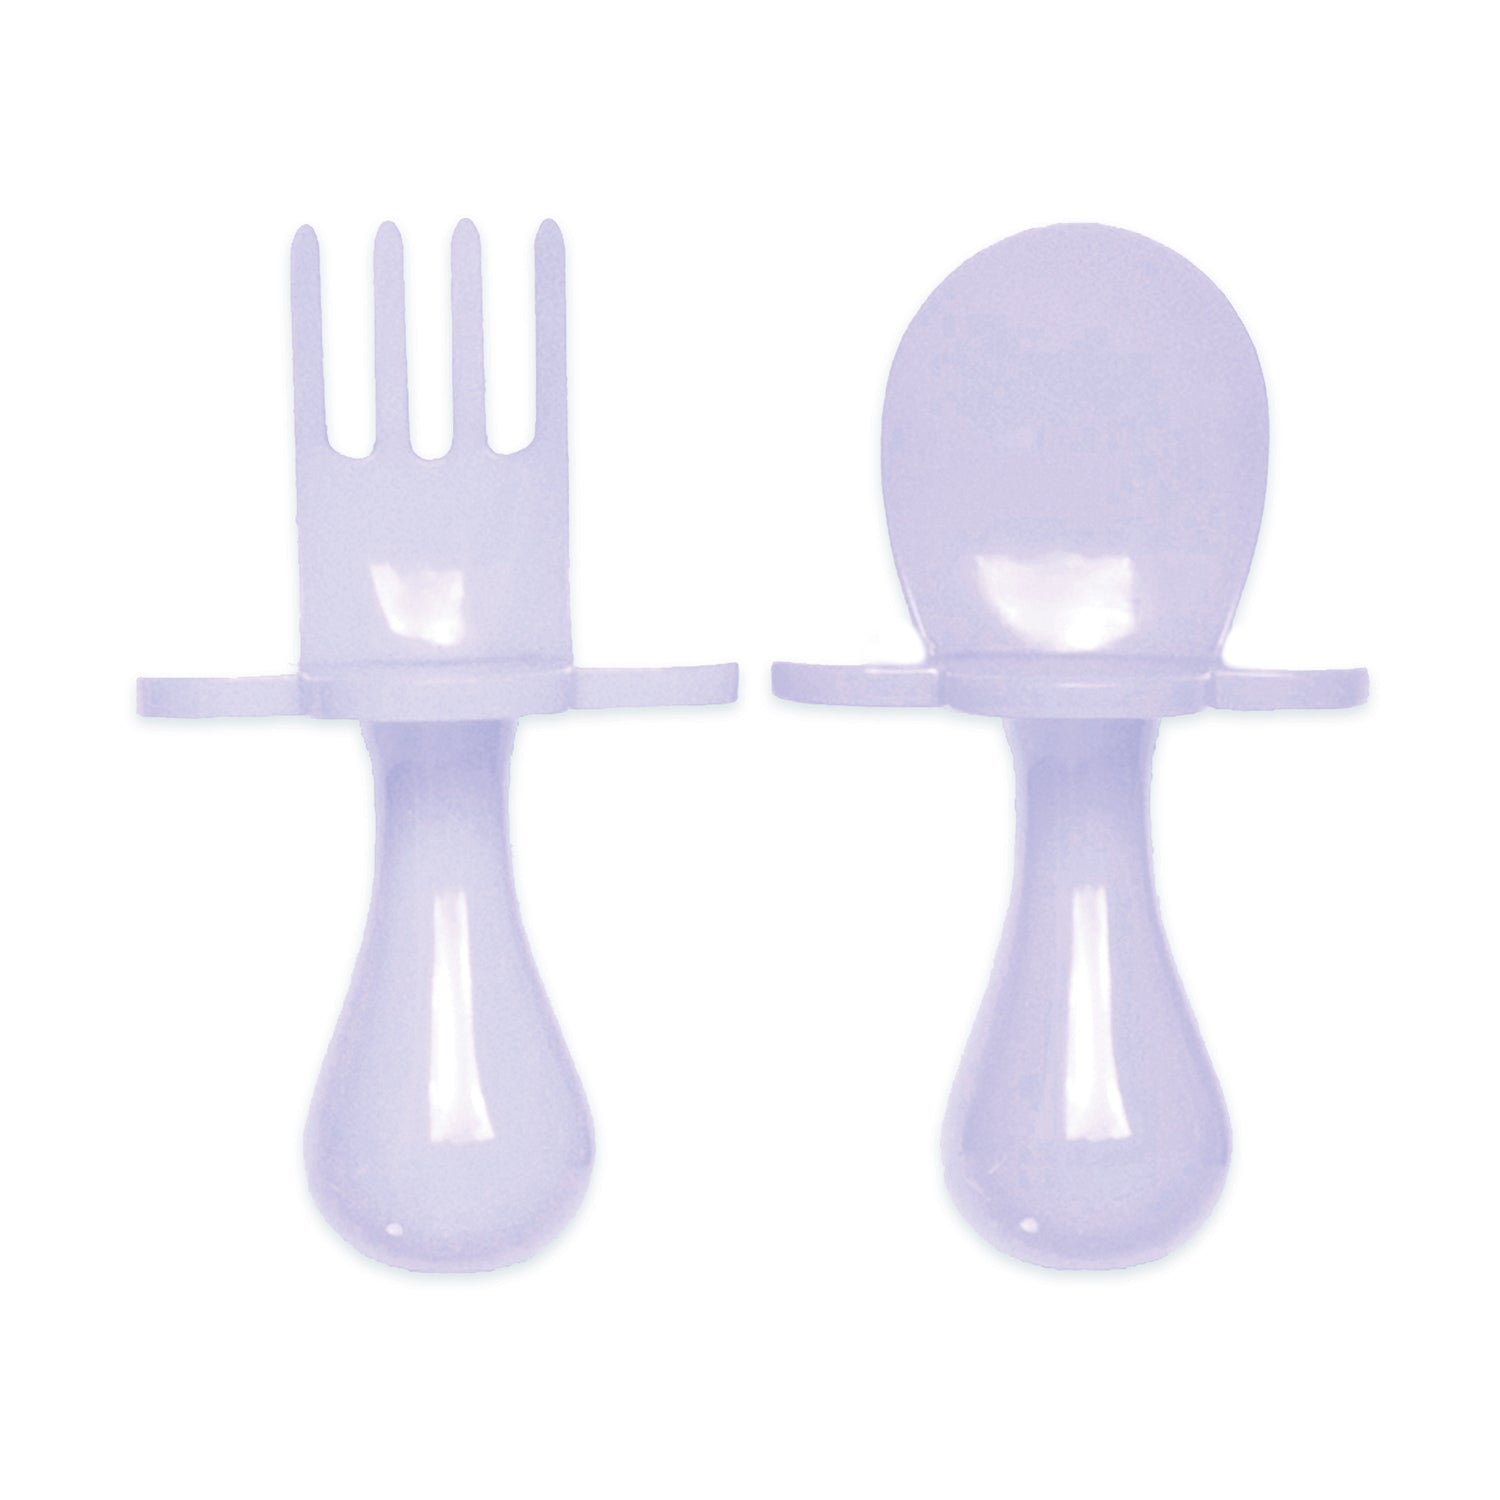  GRABEASE Bundle of 2 First Self Feed Baby Utensils with a Togo  Pouch - Anti-Choke, BPA-Free Baby Spoon and Fork Toddler Utensils for Led  Weaning Ages 6 Months+ Lavender and Blush 